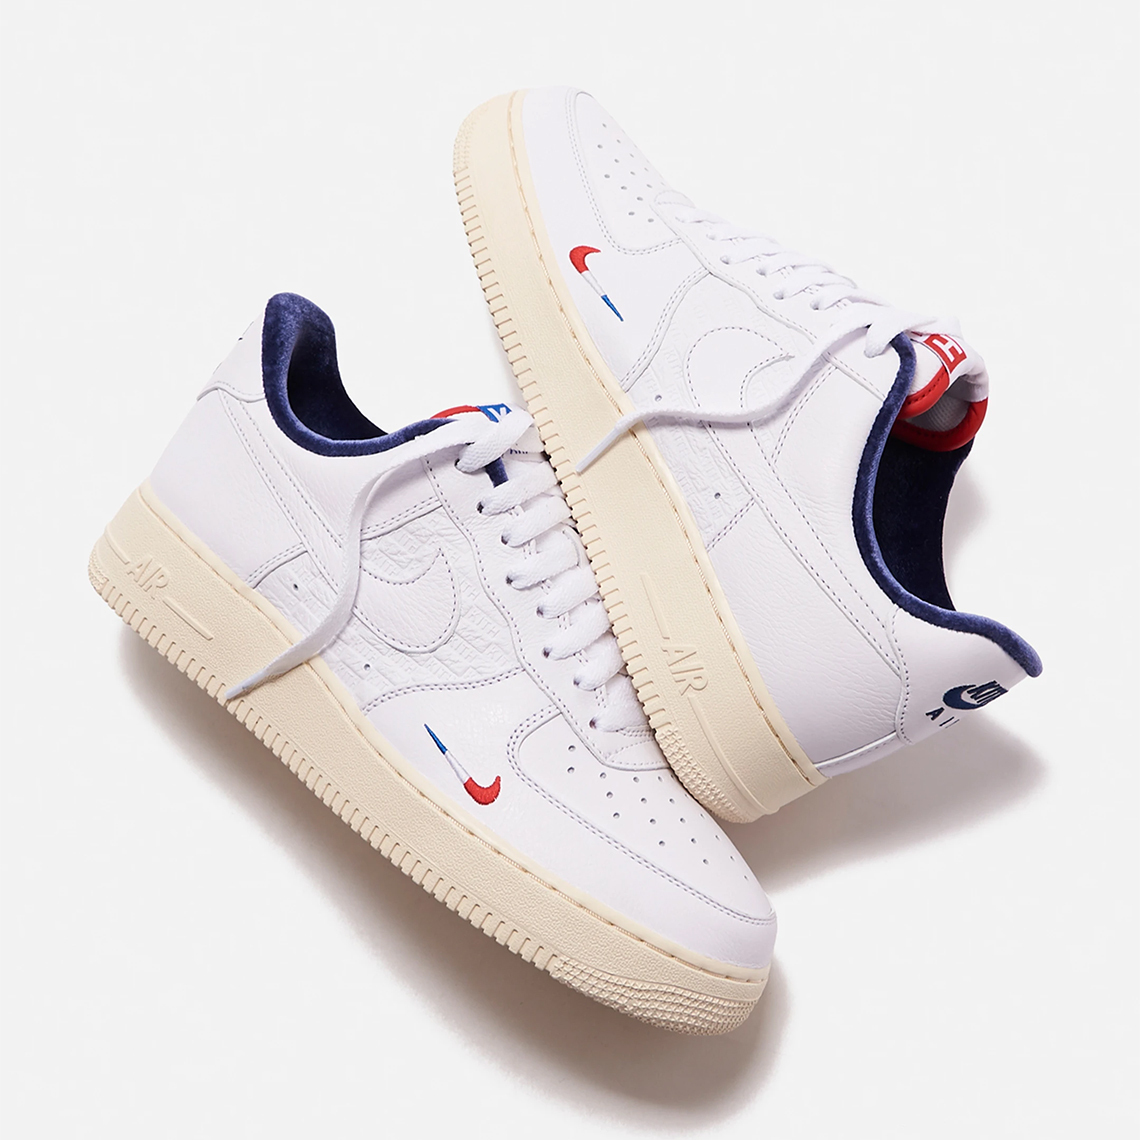 Street Contemporary Humility Kith Paris Celebrates Grand Opening with Commemorative Nike Air Force 1